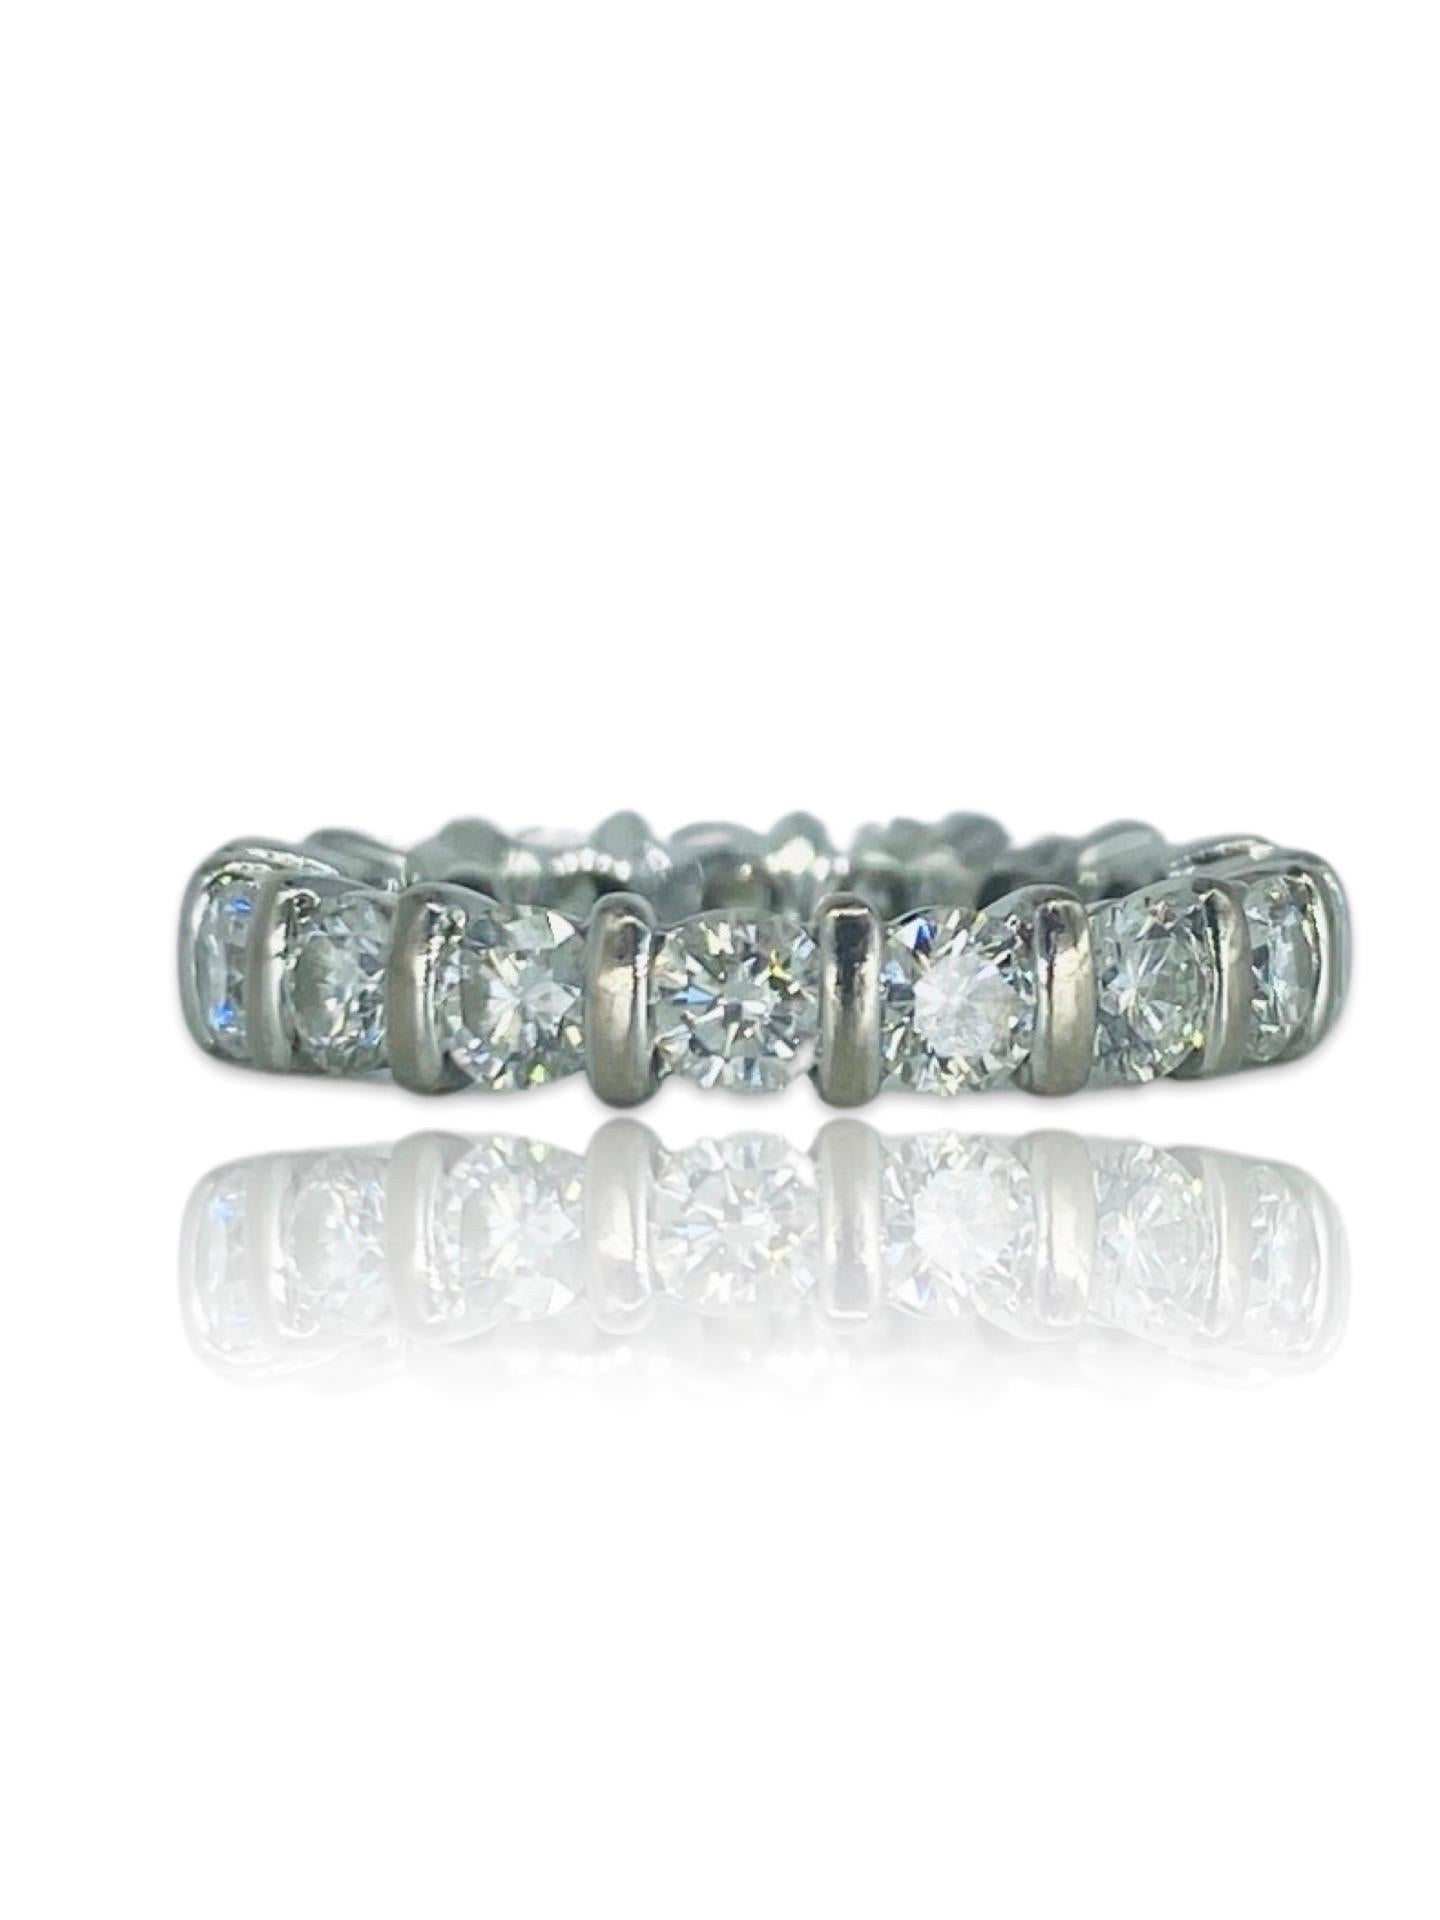 Vintage 2.04 Carat Round Diamonds Eternity Ring. The diamonds featured in the ring G-H/VS-SI round 0.12ct/each X 17 stones for a total of 2.04tcw (by formula). The ring is made of 18k white gold and is a size 5.25 (not sizeable). The total weight of